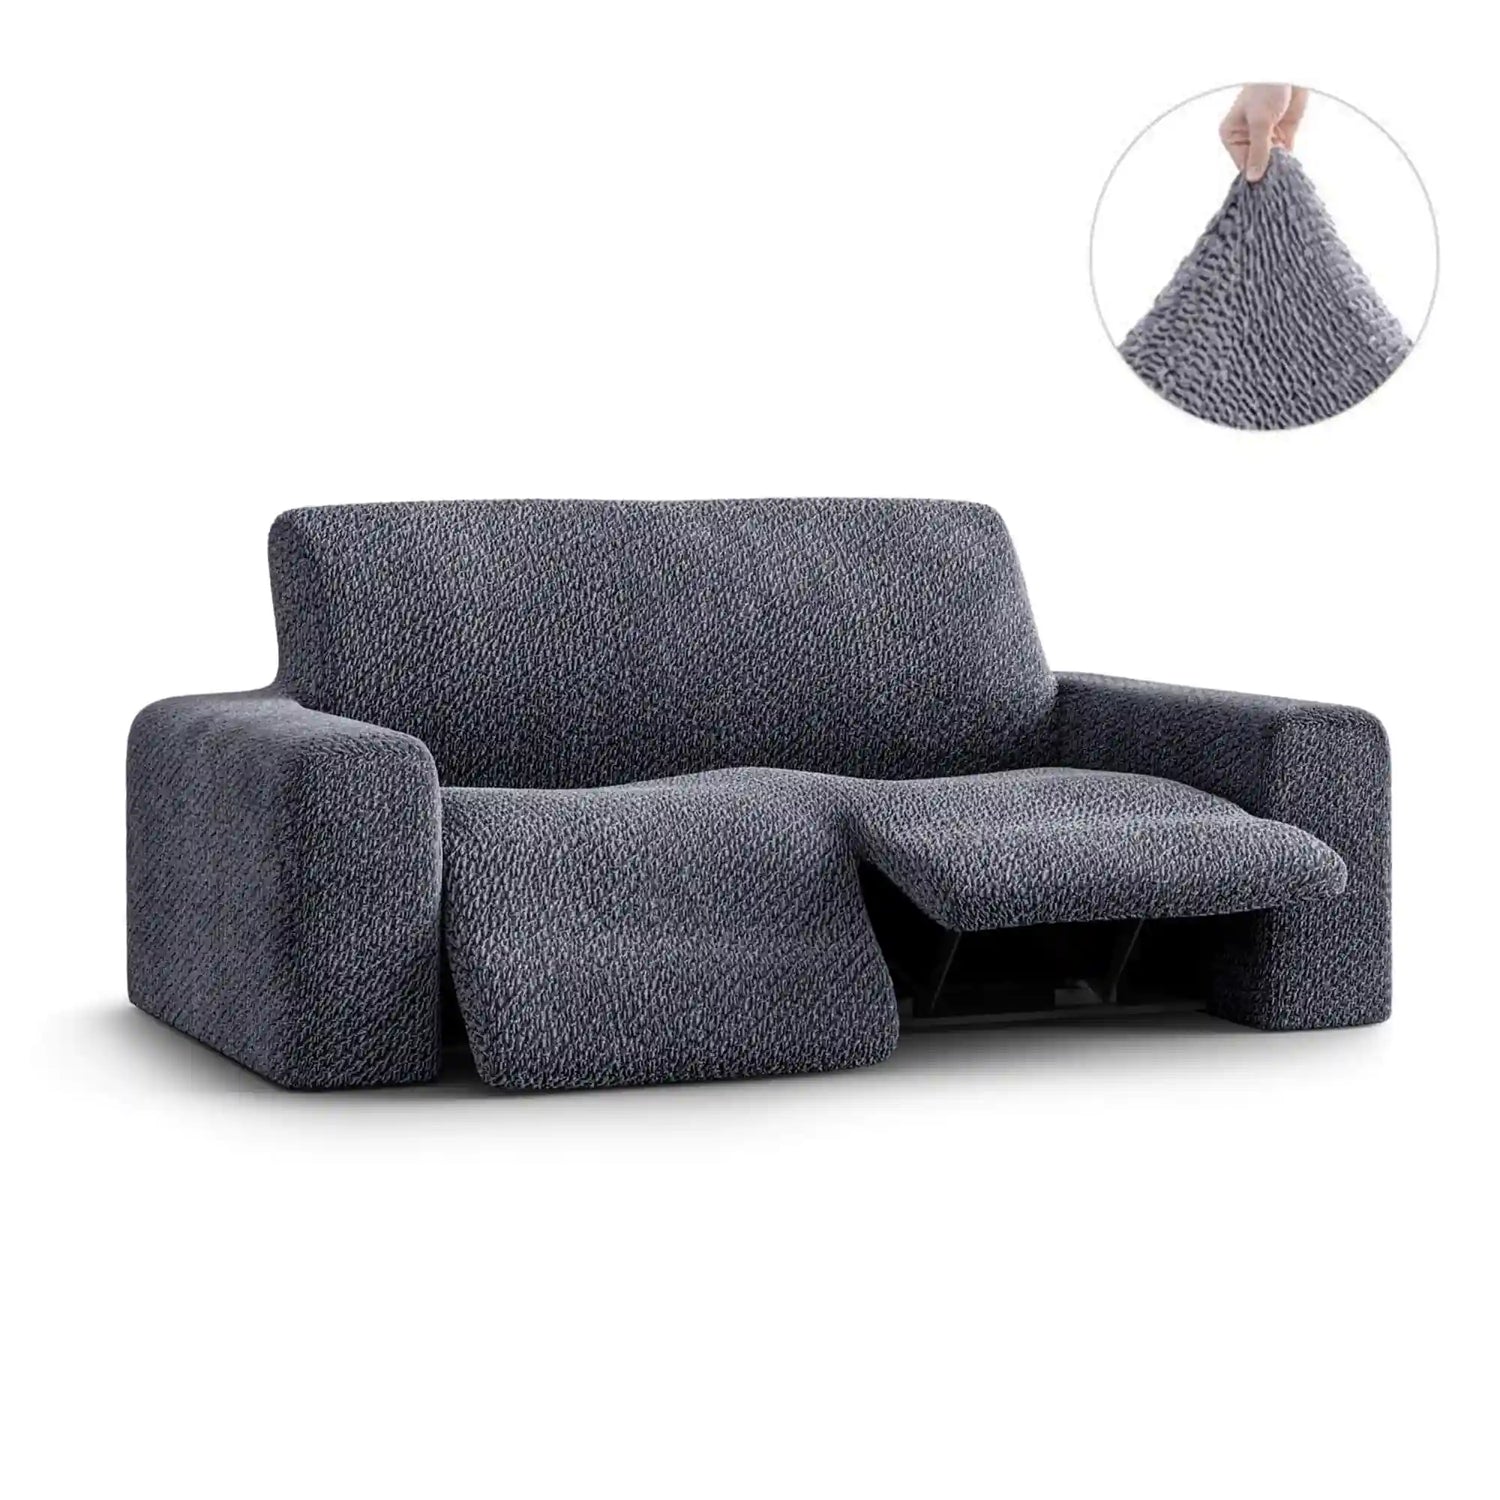 2 Seater Recliner Covers